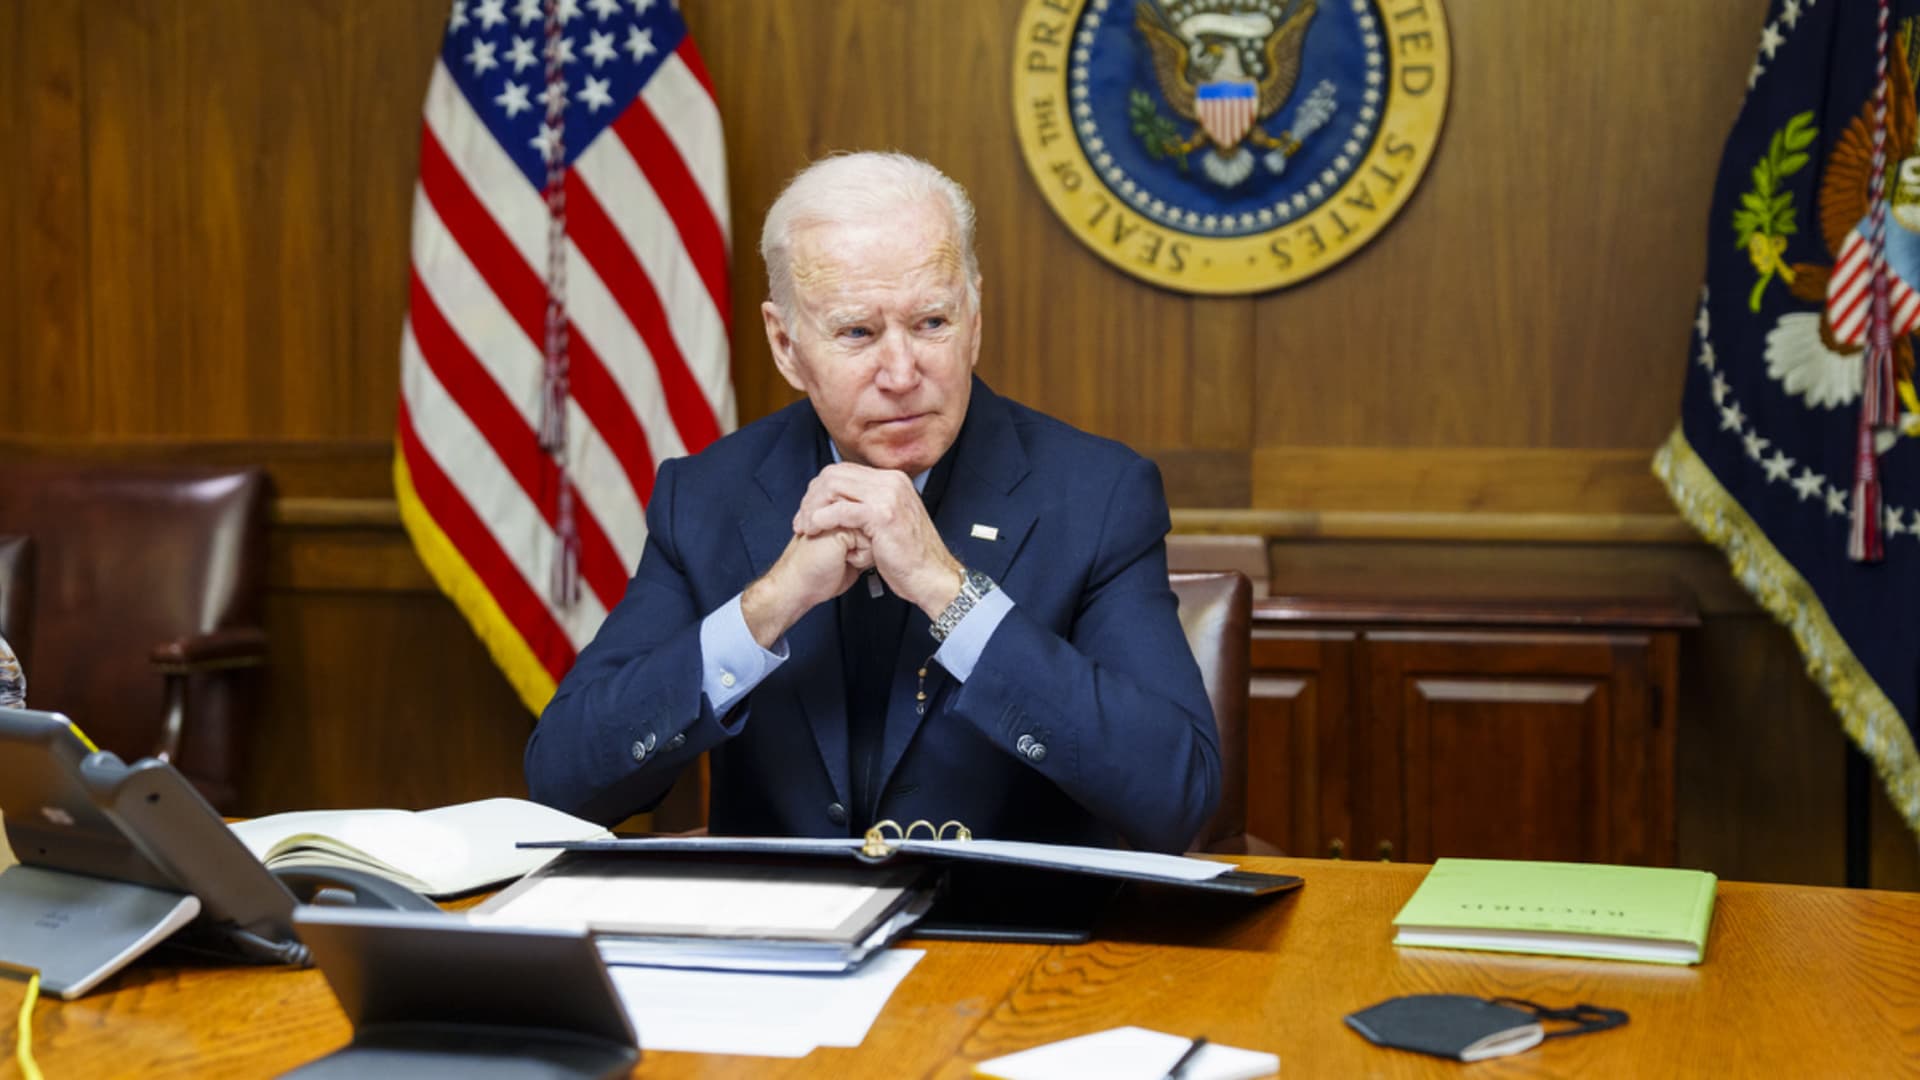 President Biden spoke with President Vladimir Putin today to make clear that if Russia further invades Ukraine, the U.S. and our allies will impose swift and severe costs on Russia.